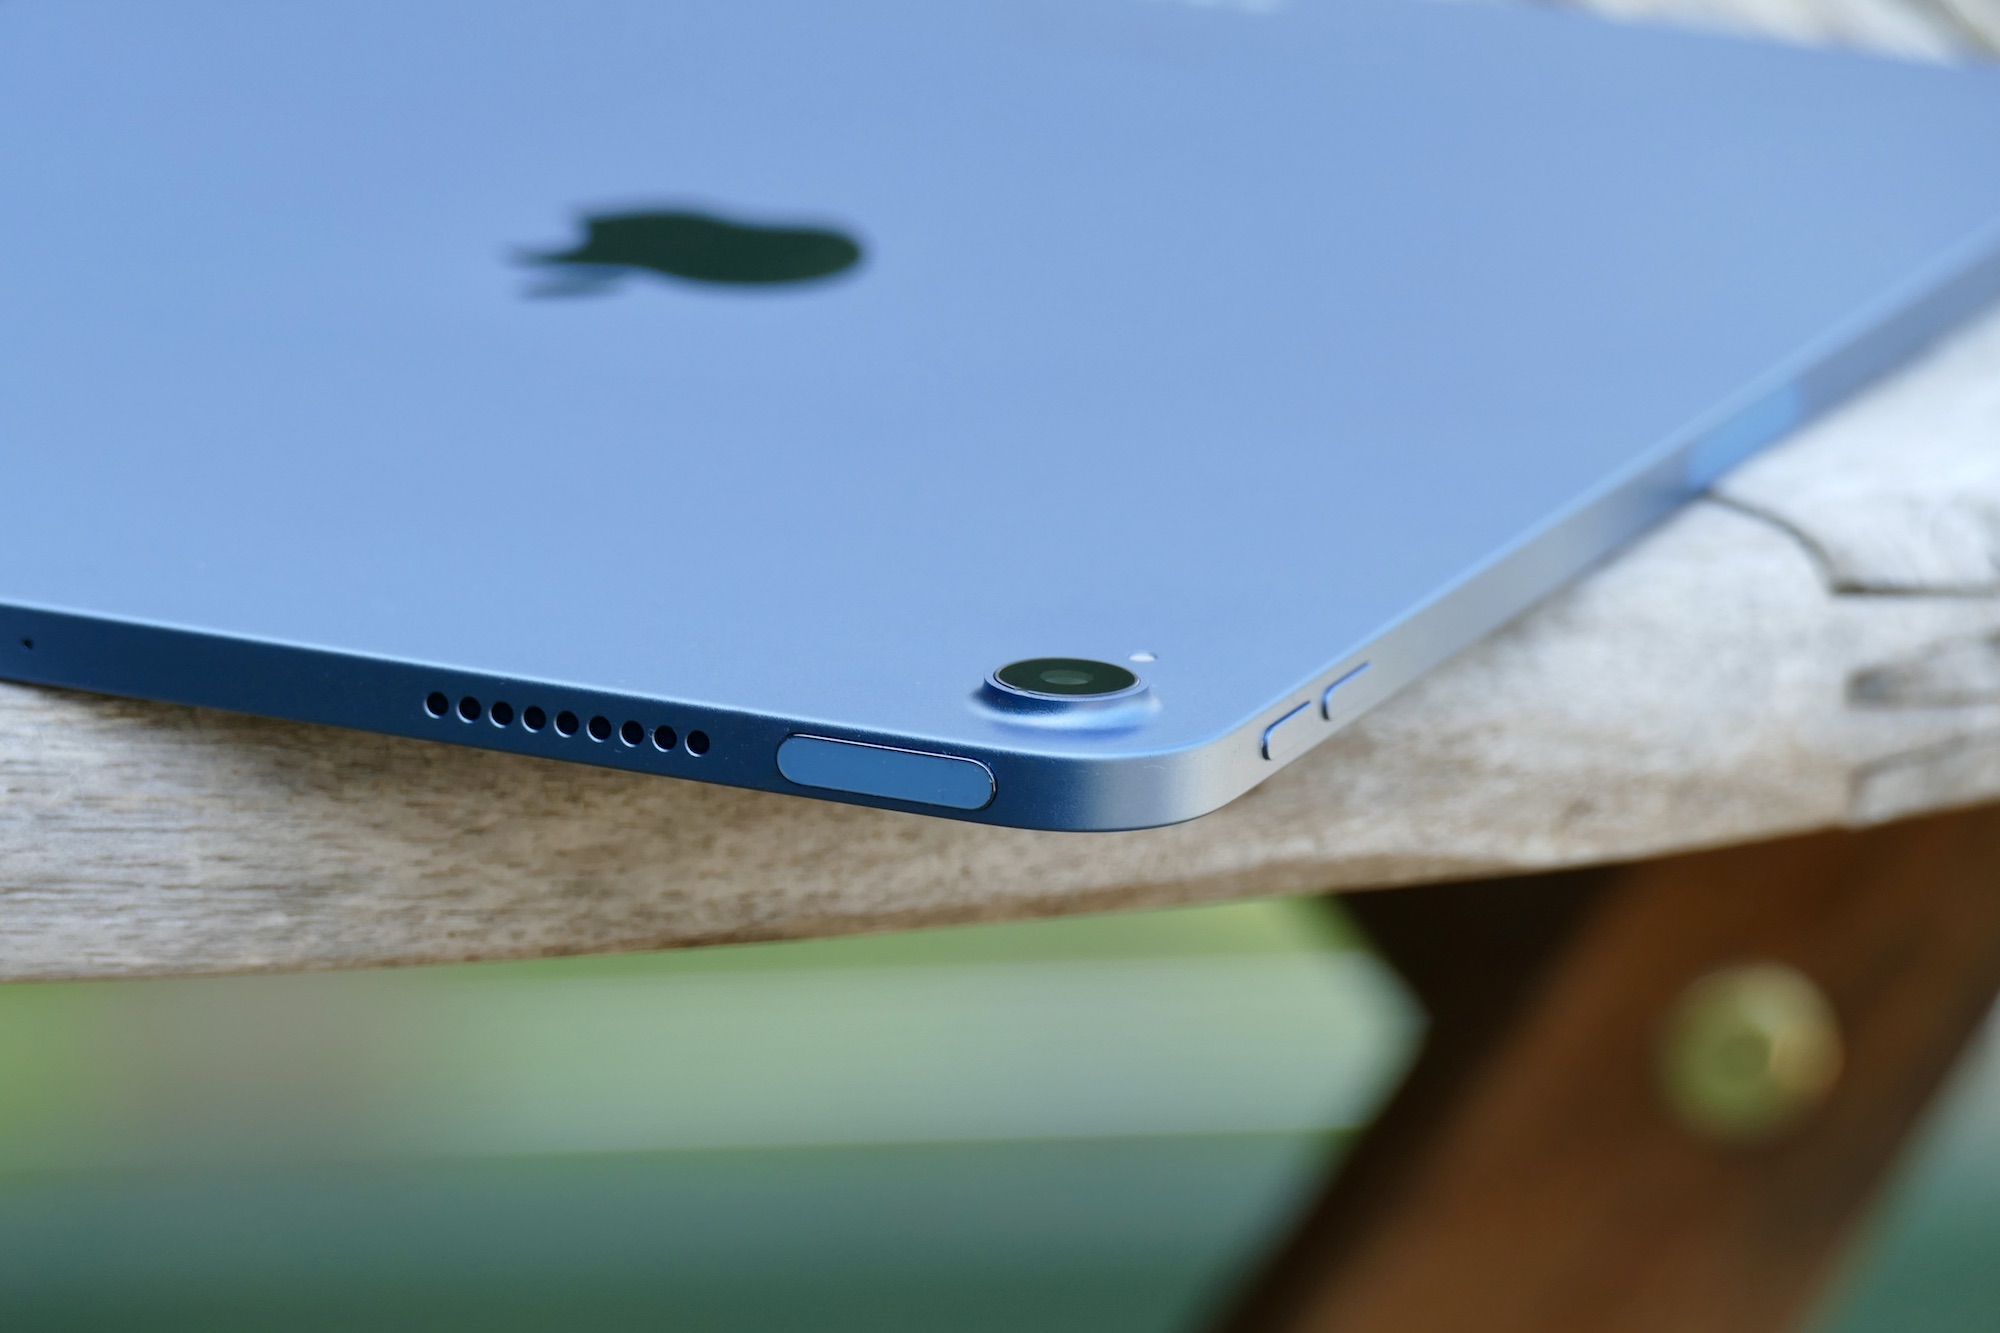 Apple iPad Air (2022) review: Almost everything you want | Digital